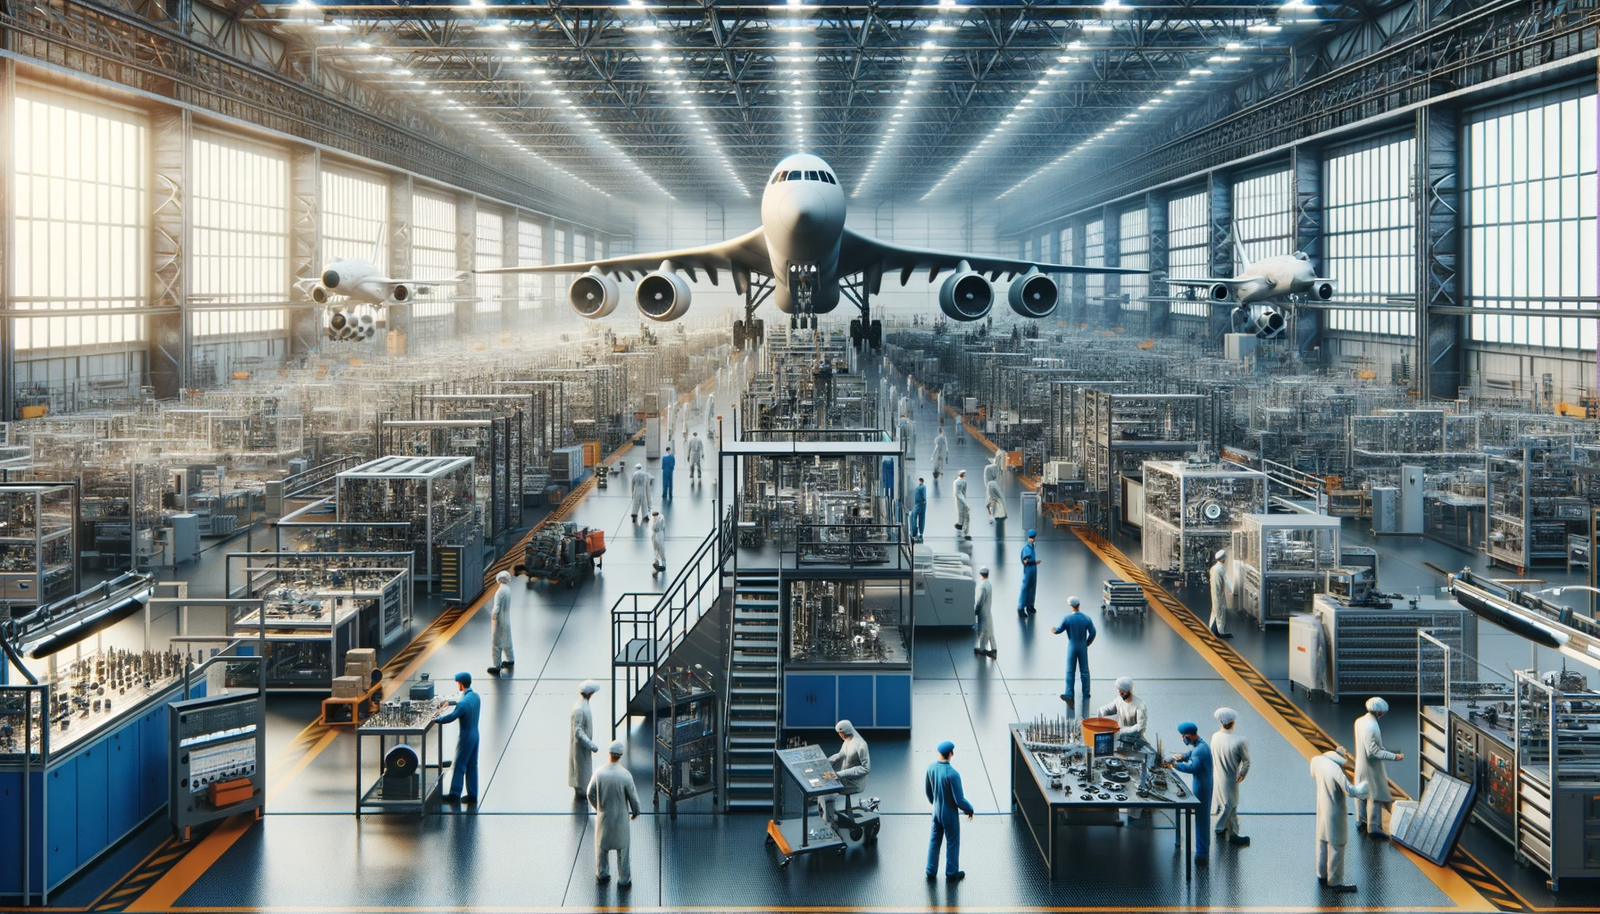 Advanced Aerospace Manufacturing Facility in Mexico with Skilled Workers and High-Tech Machinery